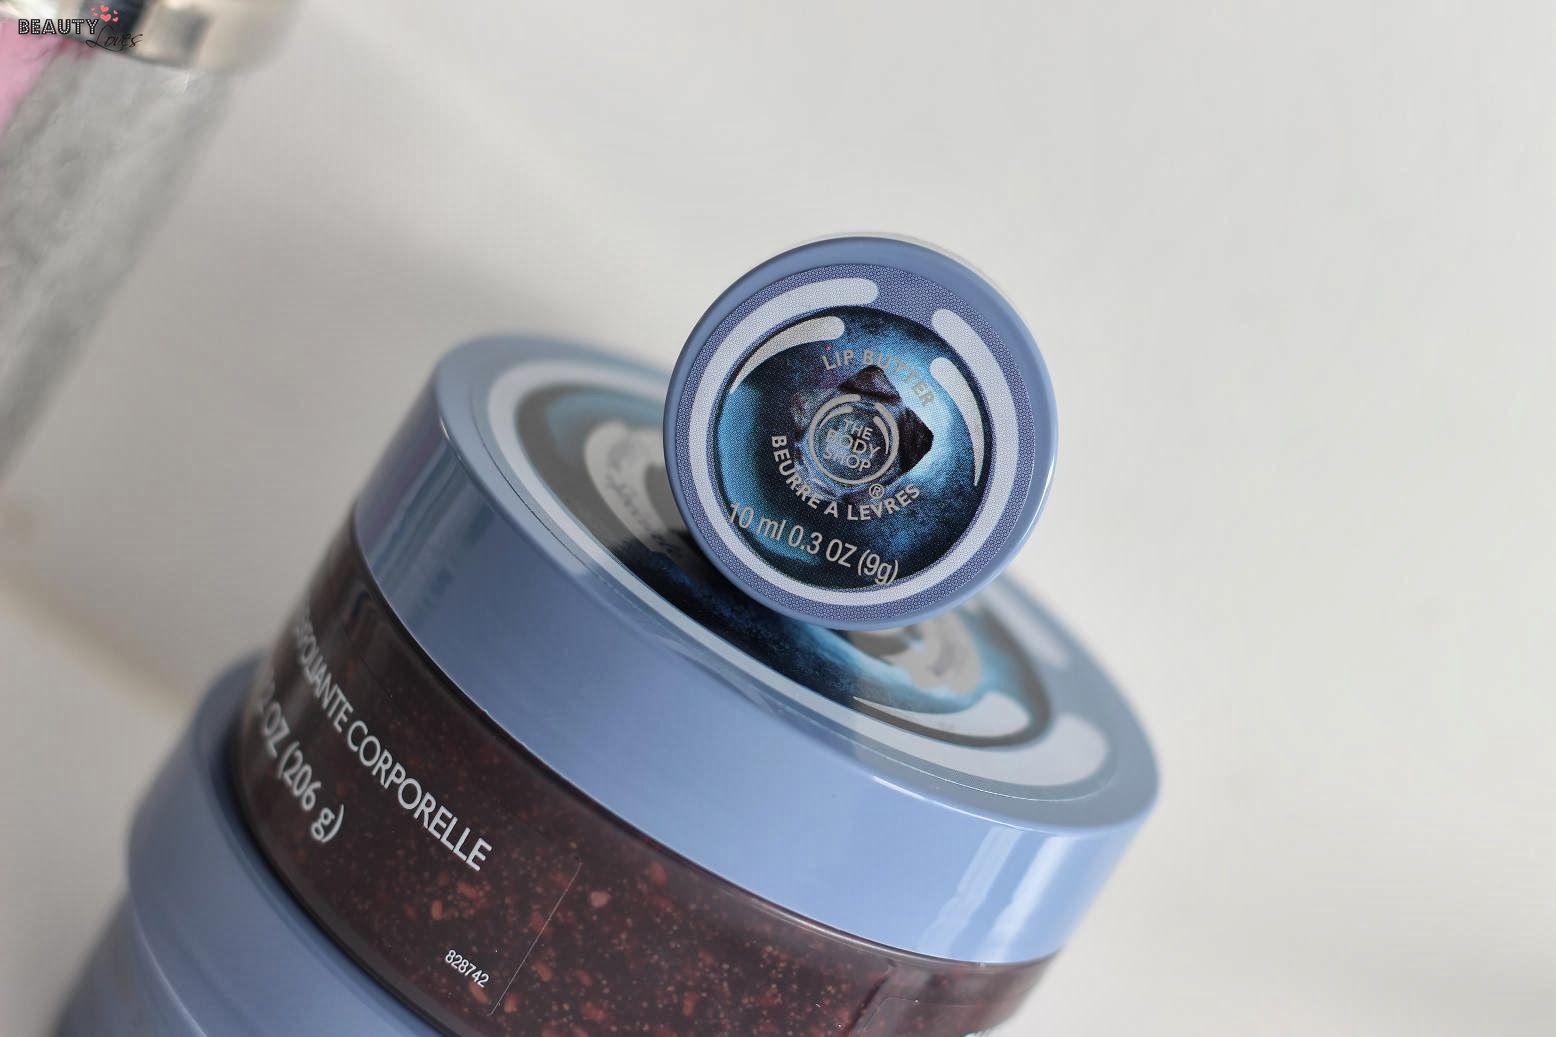 The Body Shop Blueberry